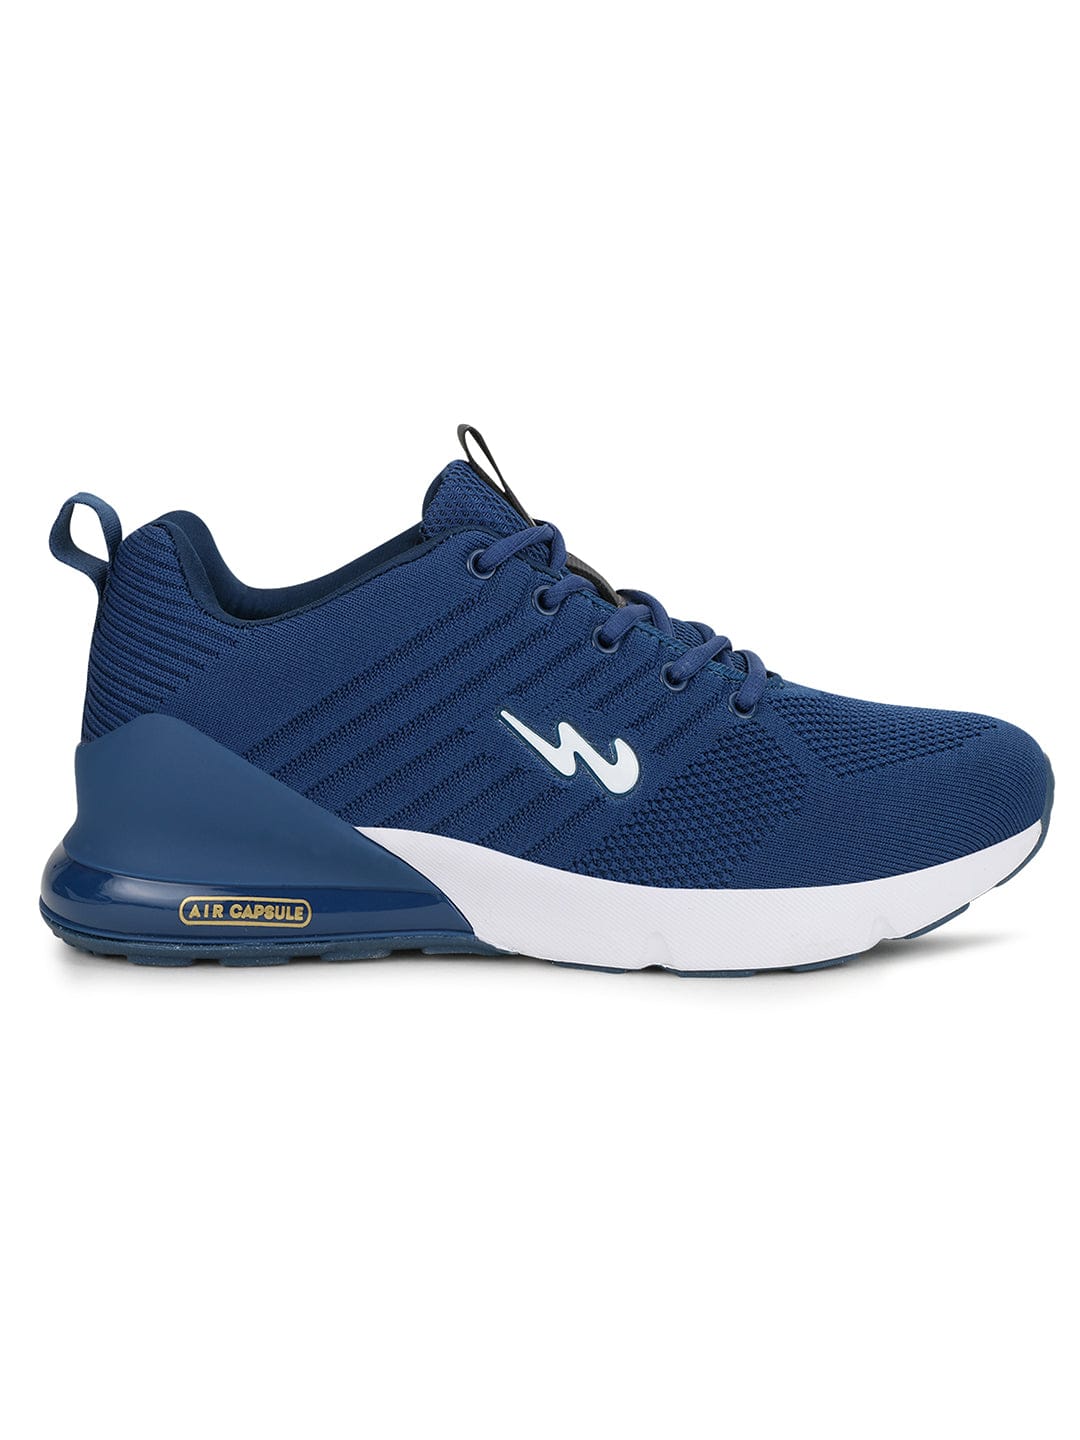 Buy MIKE (N) Blue Men's Running Shoes online | Campus Shoes